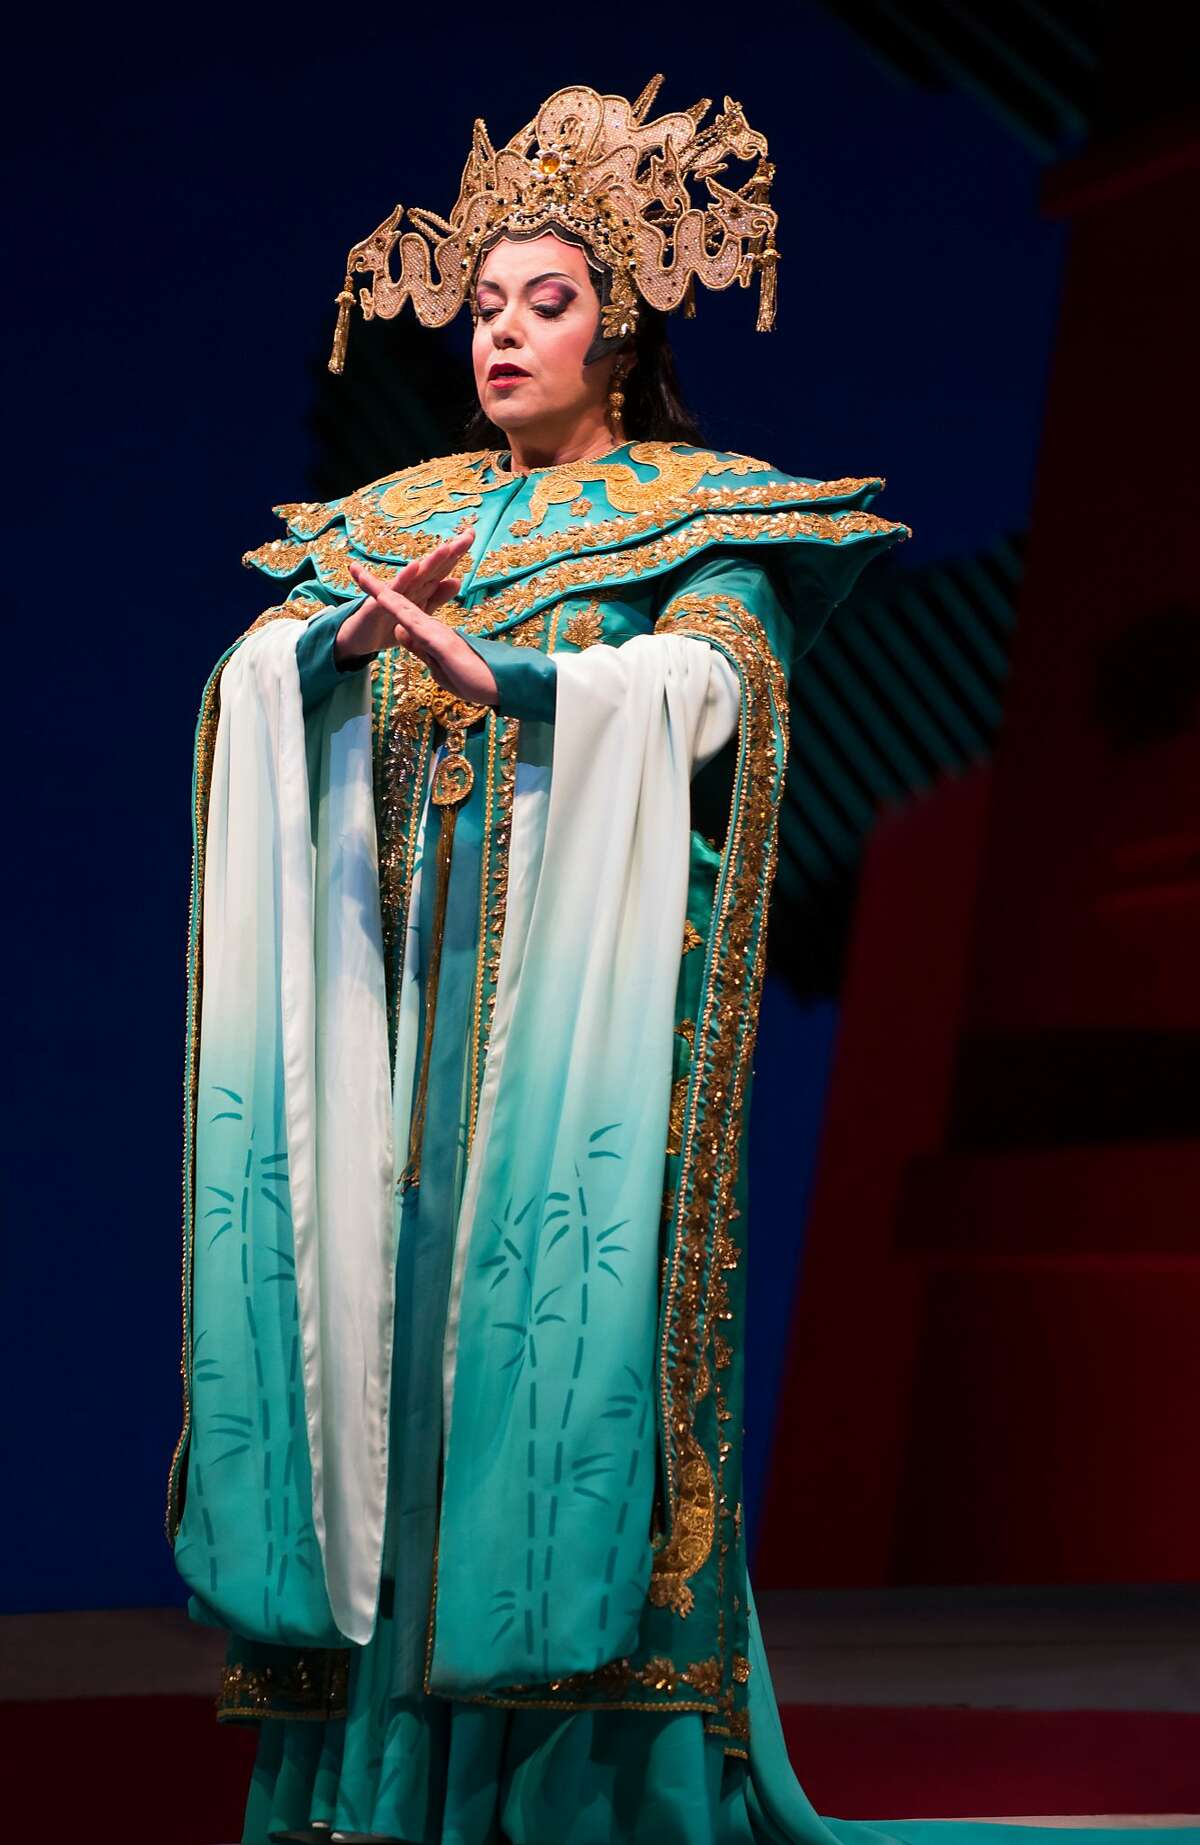 Nina Stemme in the title role of Puccini's "Turandot" at SF Opera